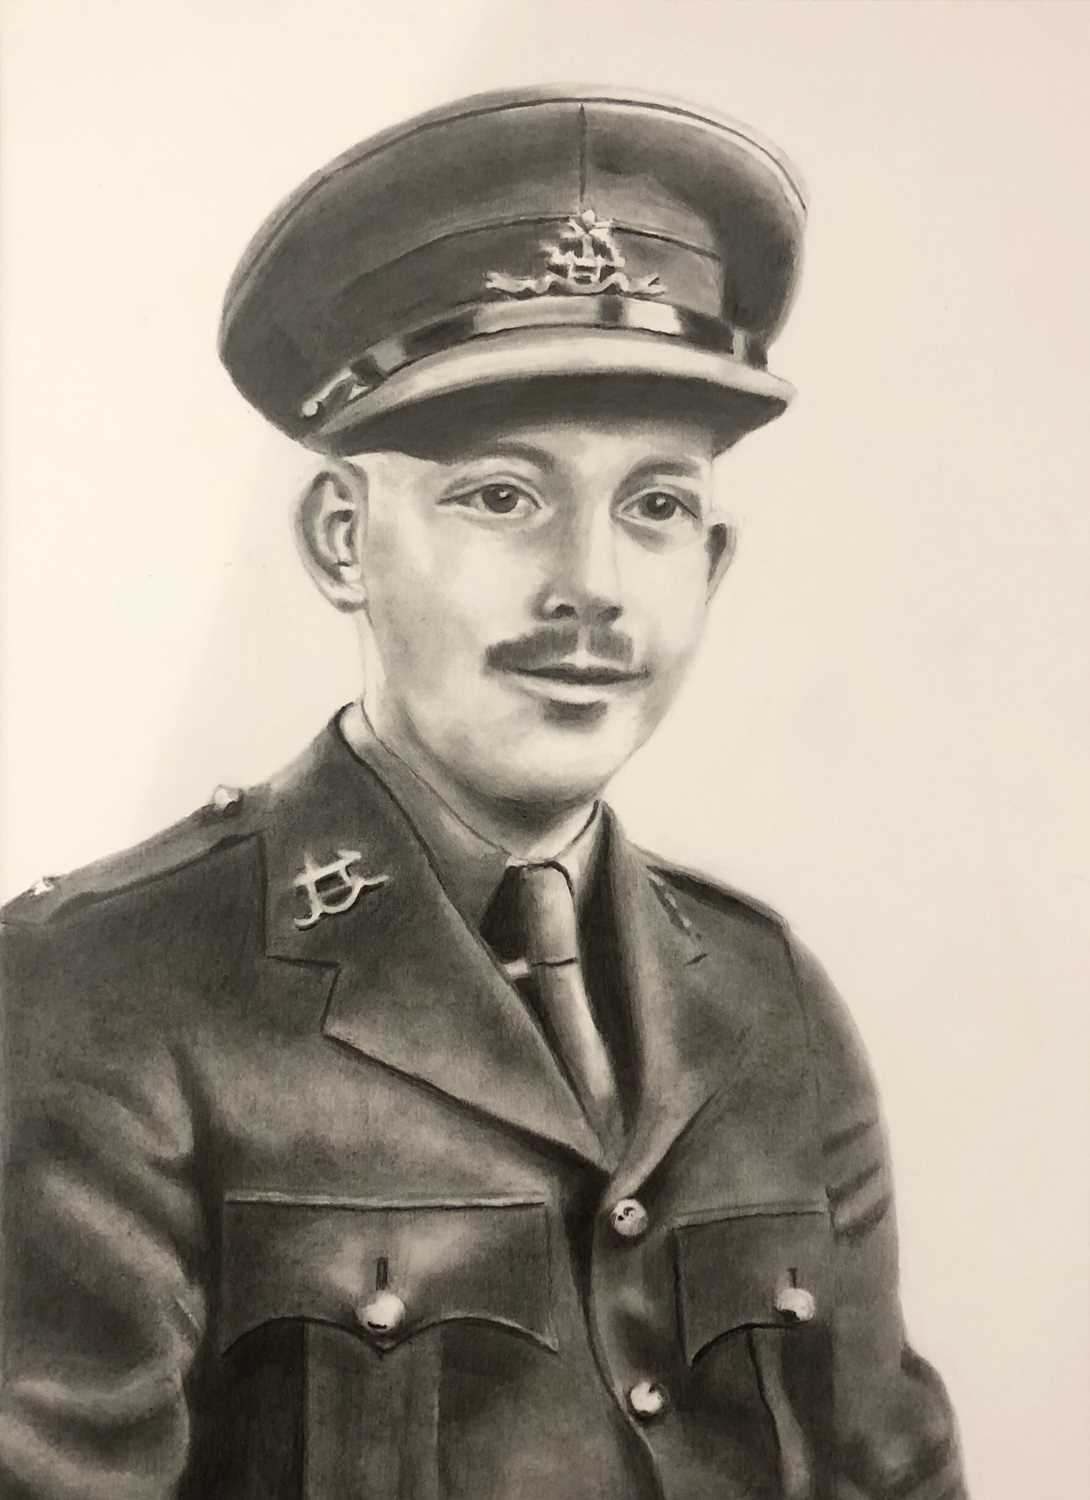 Young Captain Tom Moore pencil drawing